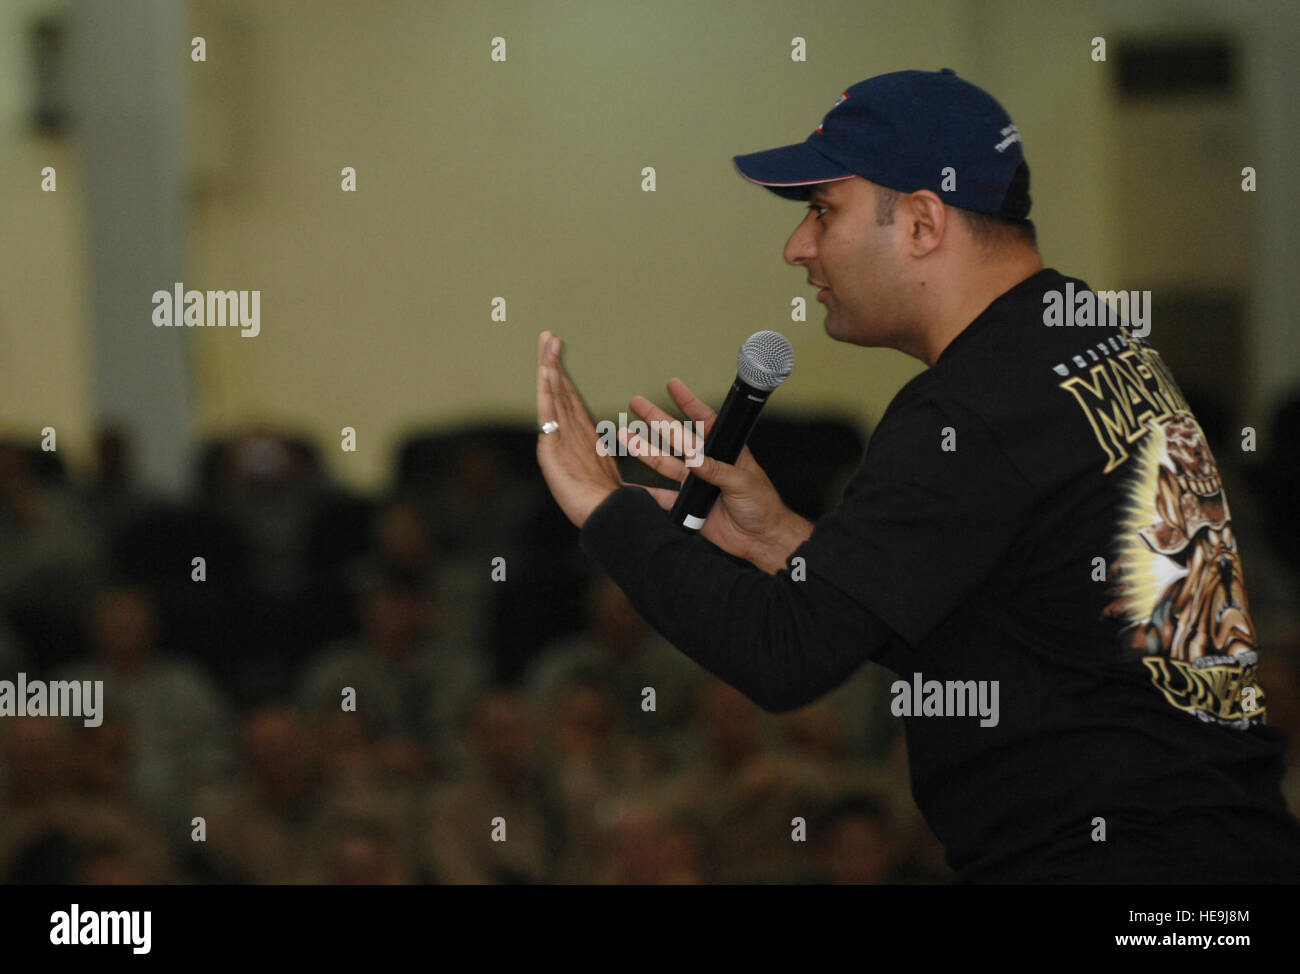 Comedian Russell Peters tells a joke during a USO show at Camp Fallujah, Iraq, Nov. 22, 2007. Peters traveled with Marine Corps Gen. James E. Cartwright, vice chairman of the Joint Chiefs of Staff, to visit troops for Thanksgiving.  Tech. Sgt. Adam M. Stump, U.S. Air Force. (Released) Stock Photo